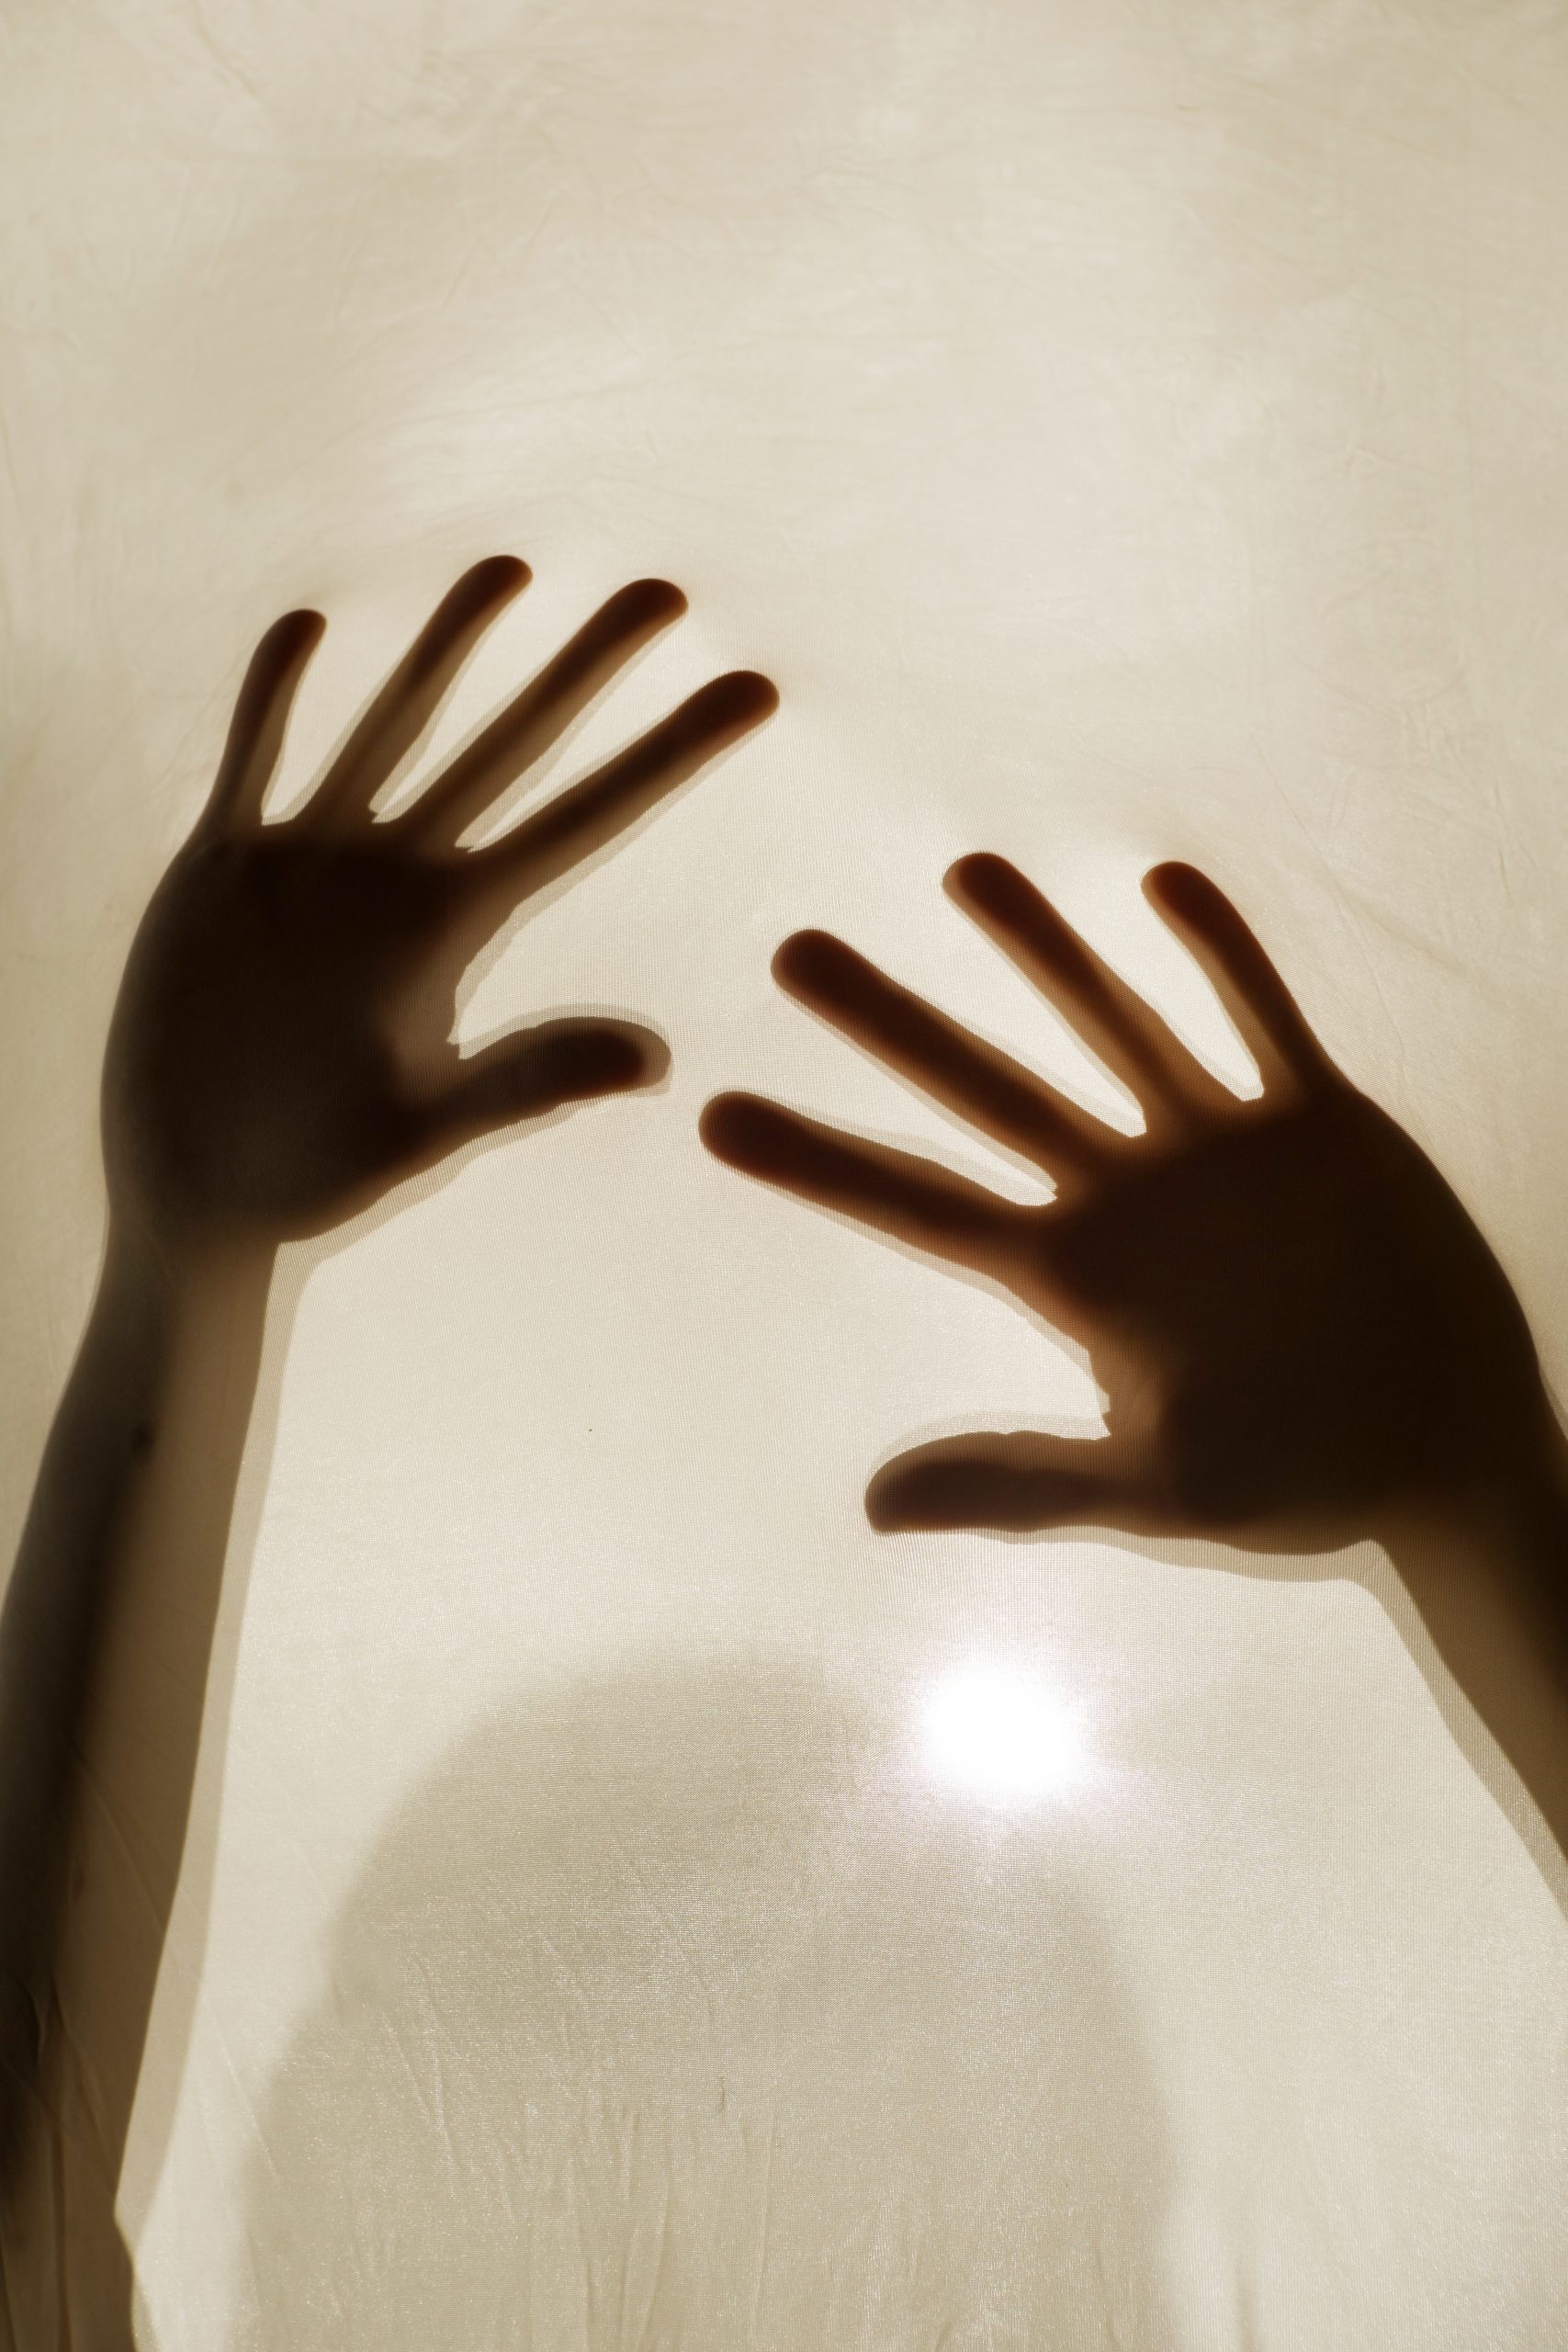 Photographic representation of violence on women, hands against sheet